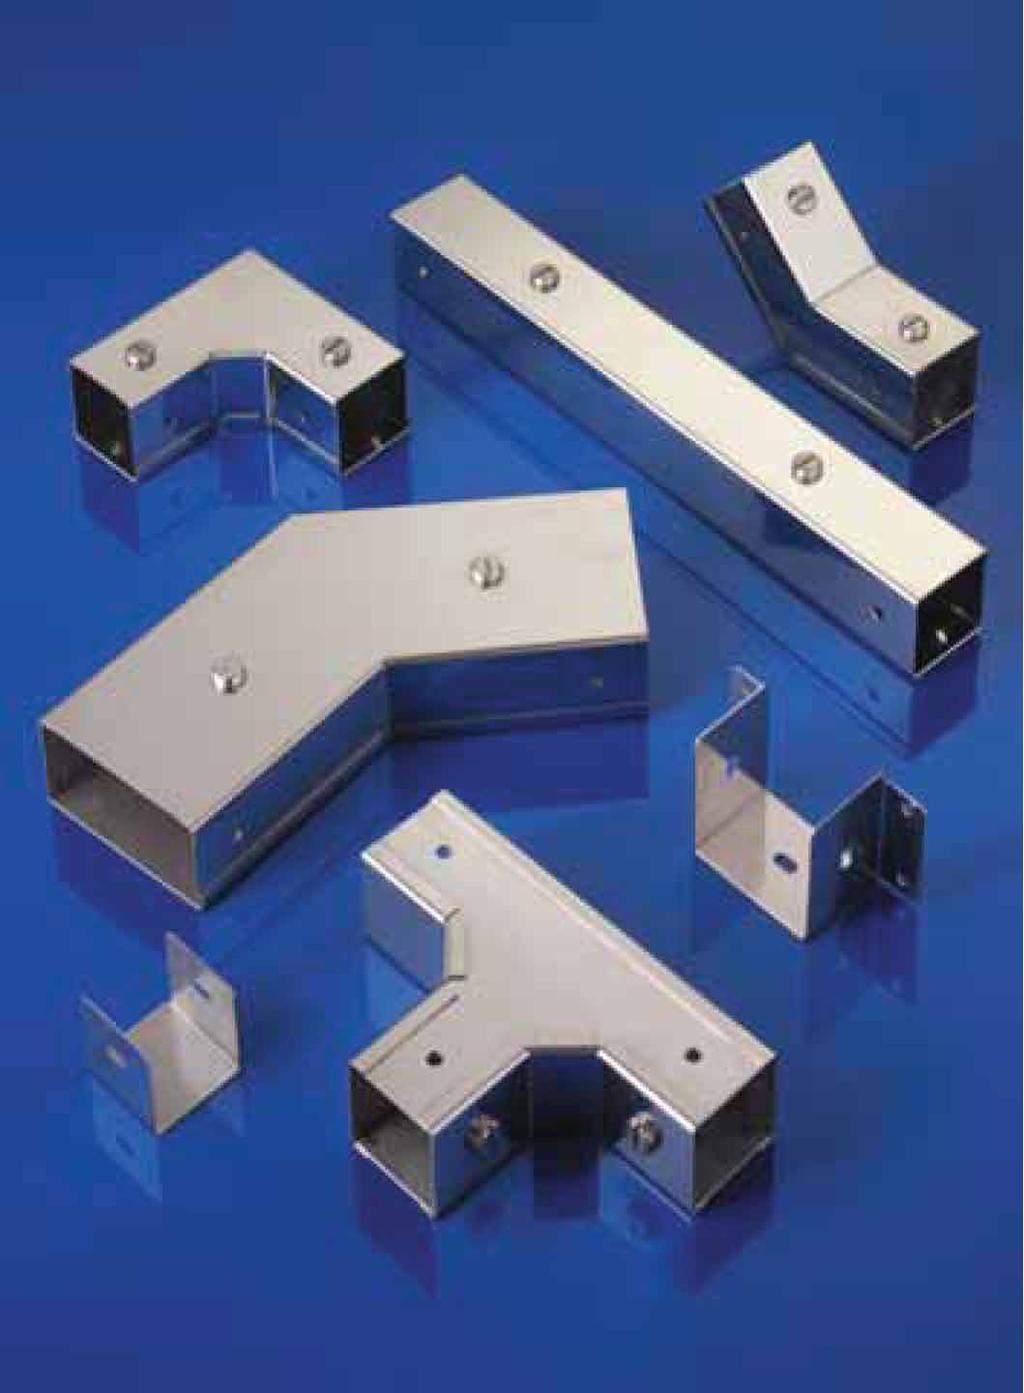 WEATHERPROOF TRUNKING 10mm C B A A B C Body Cover Finish Thick Thick KTW22 KT2W22 50mm 50mm 3000mm 1.5mm 1.5mm KTW32 KT2W32 50mm 75mm 3000mm 1.5mm 1.5mm KTW33 KT2W33 75mm 75mm 3000mm 1.5mm 1.5mm KTW42 KT2W42 50mm 100mm 3000mm 1.